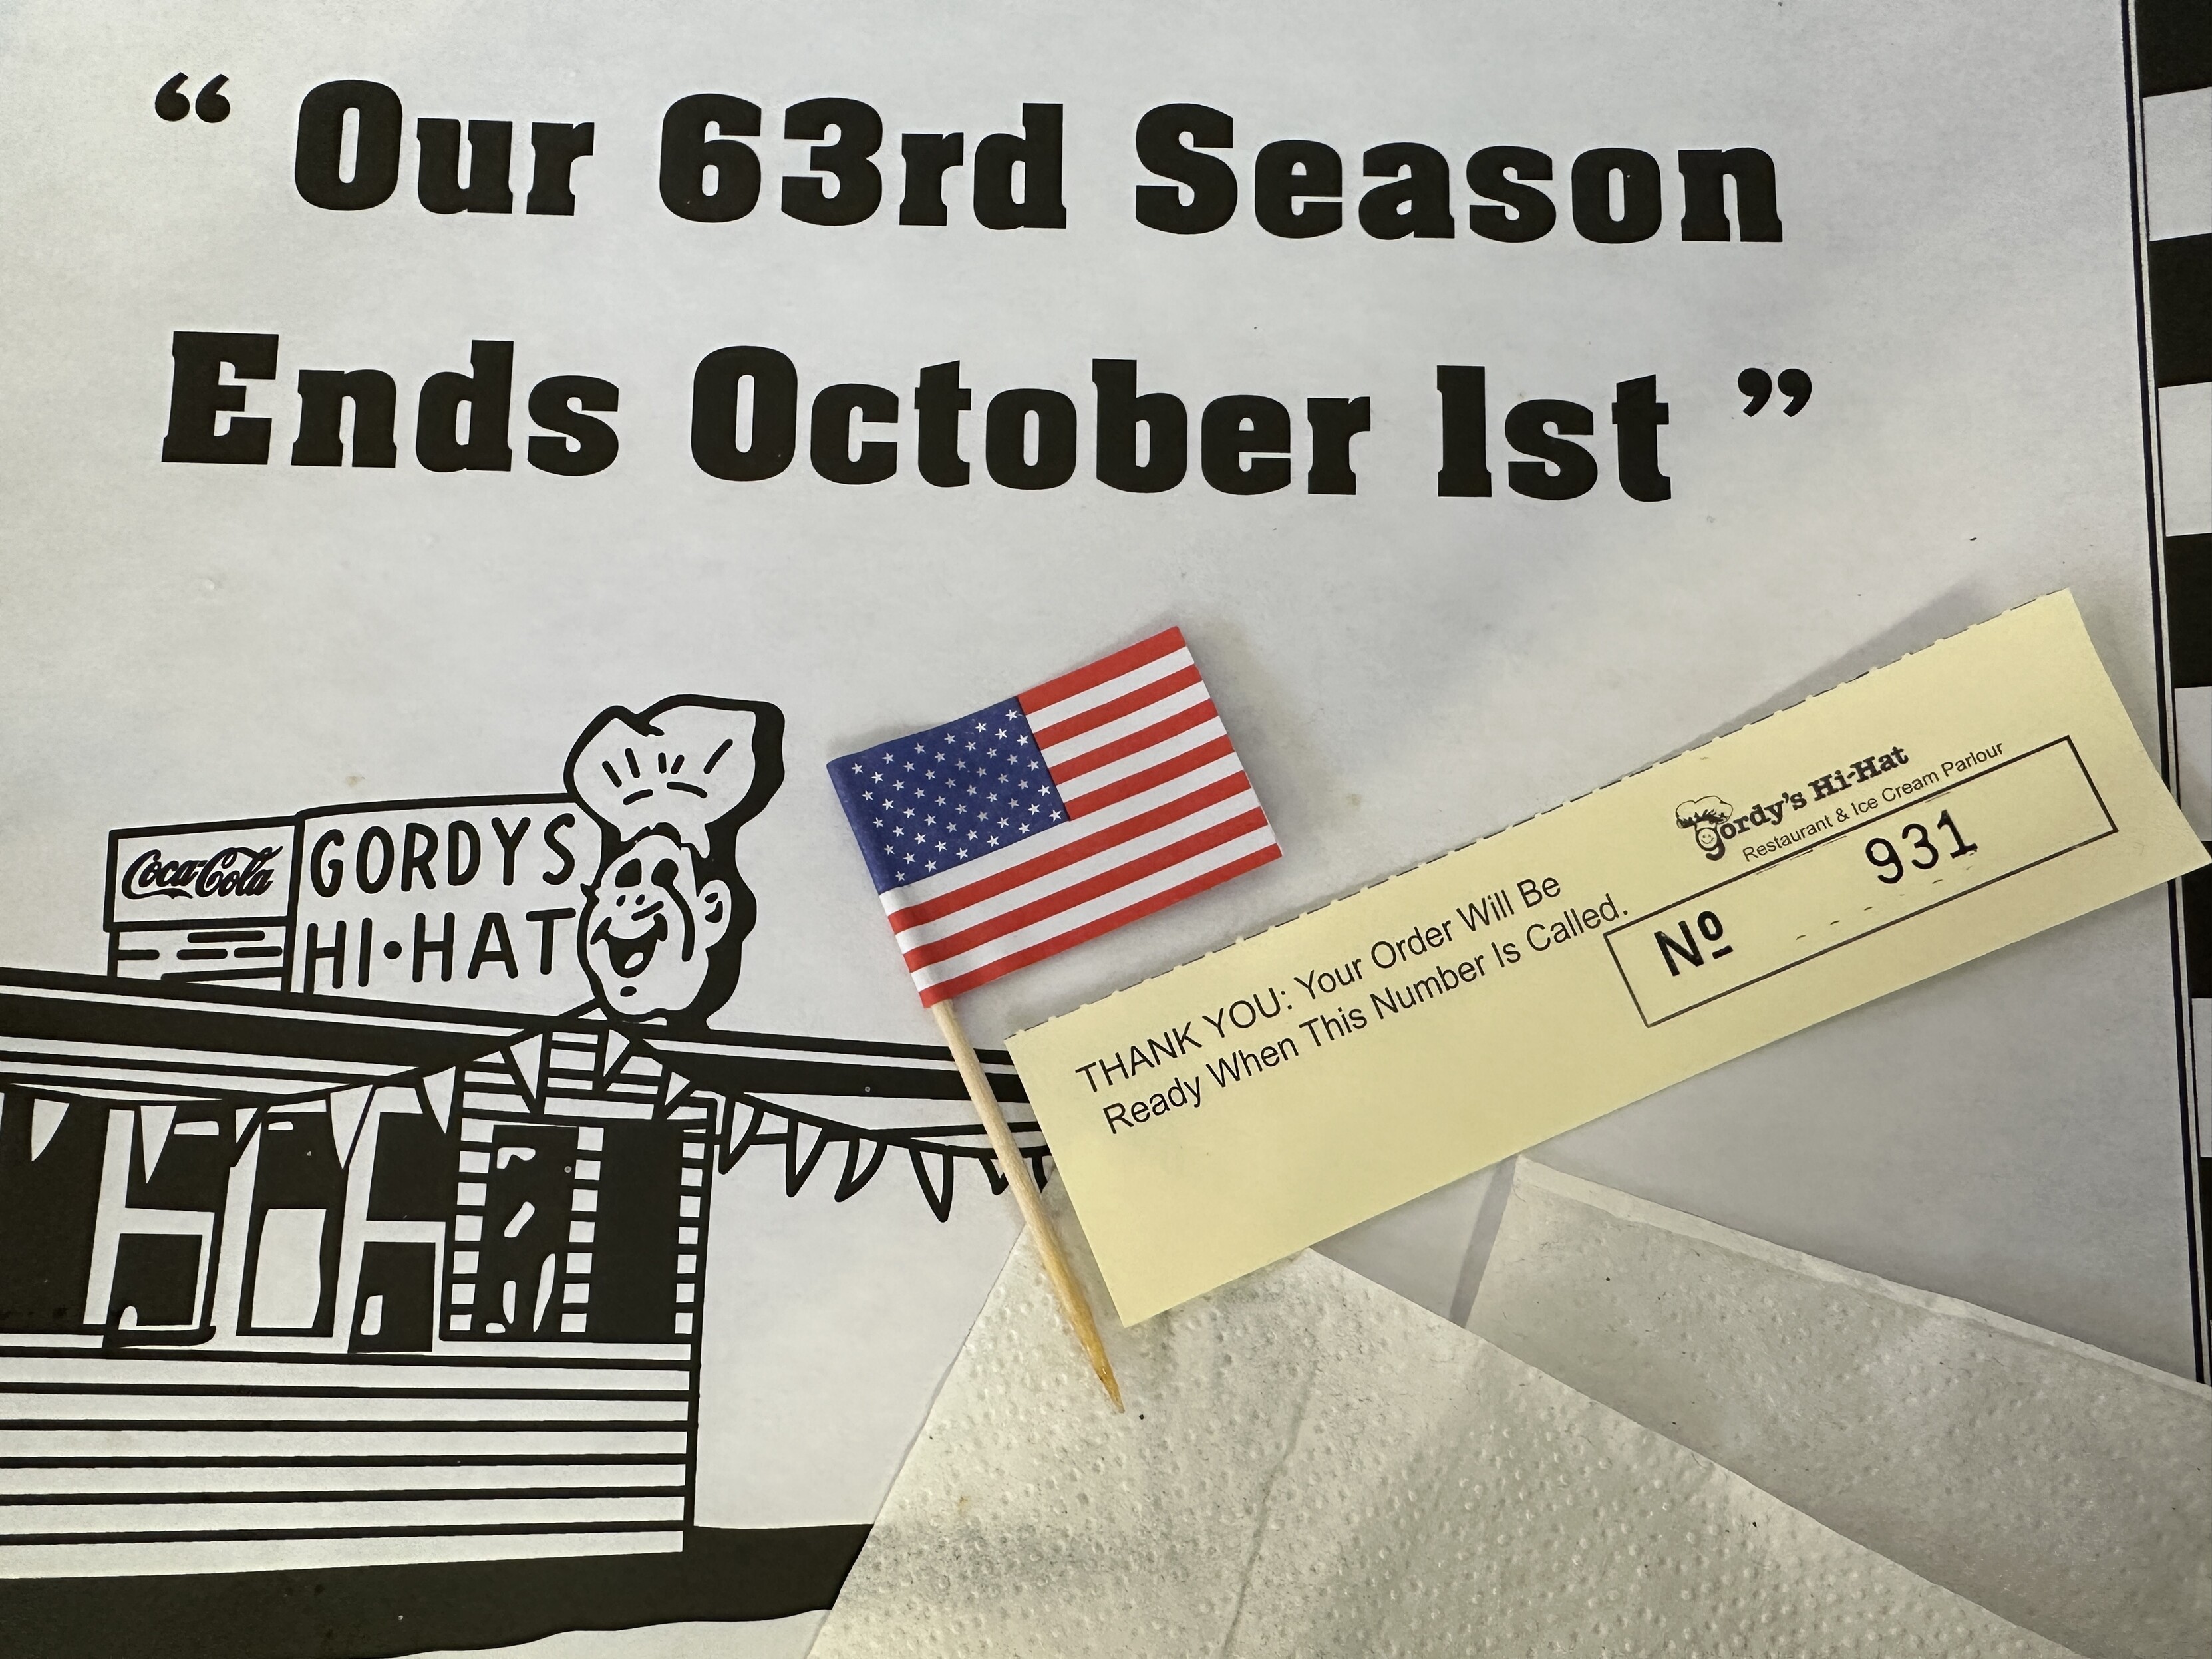 Gordy’s Hi-Hat closes for the season on October 1st (per their printed placement in the picture)